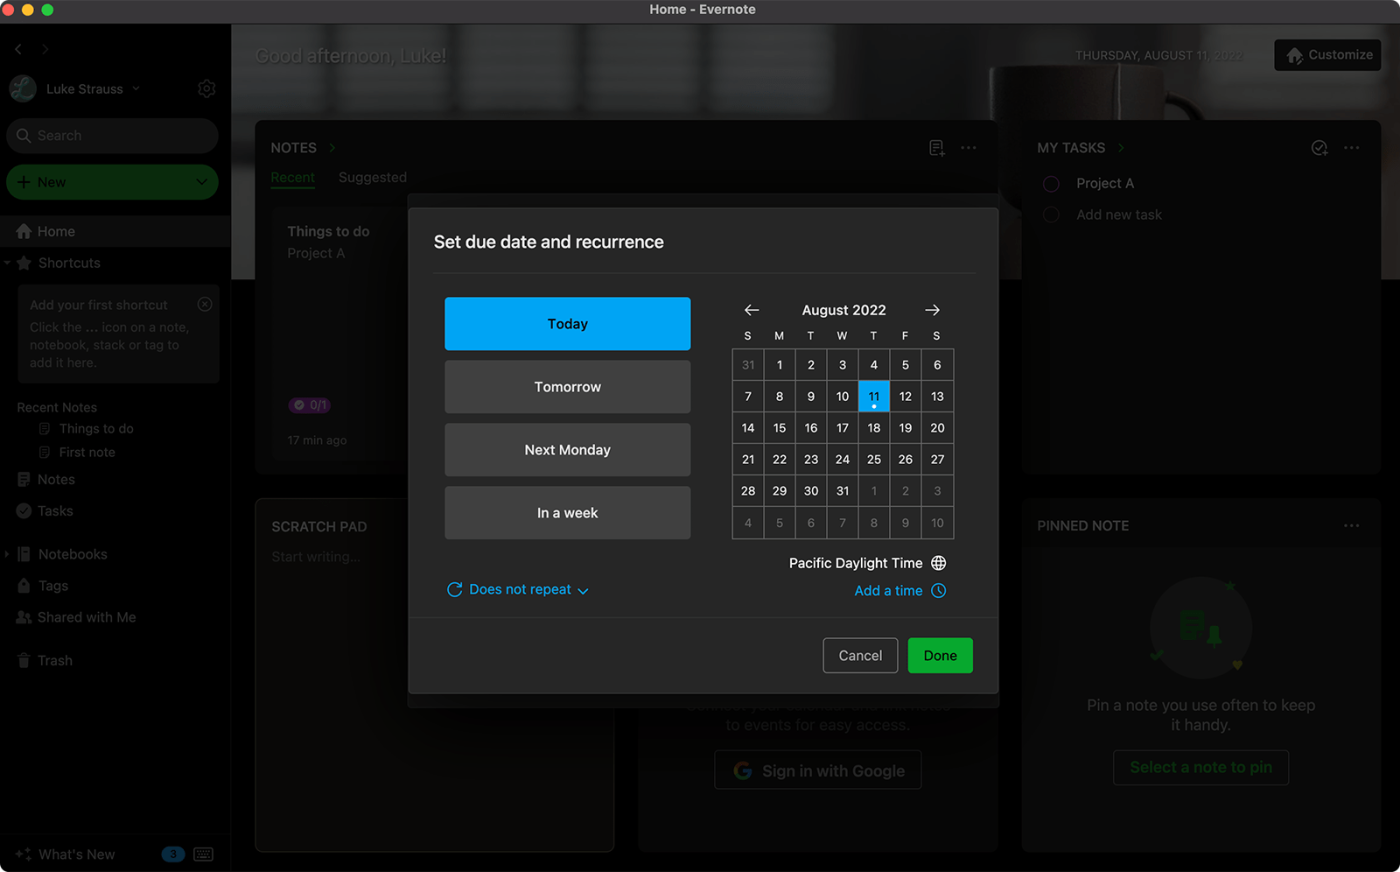 Screenshot of Evernote's interface for setting task due dates (available with the Personal plan)